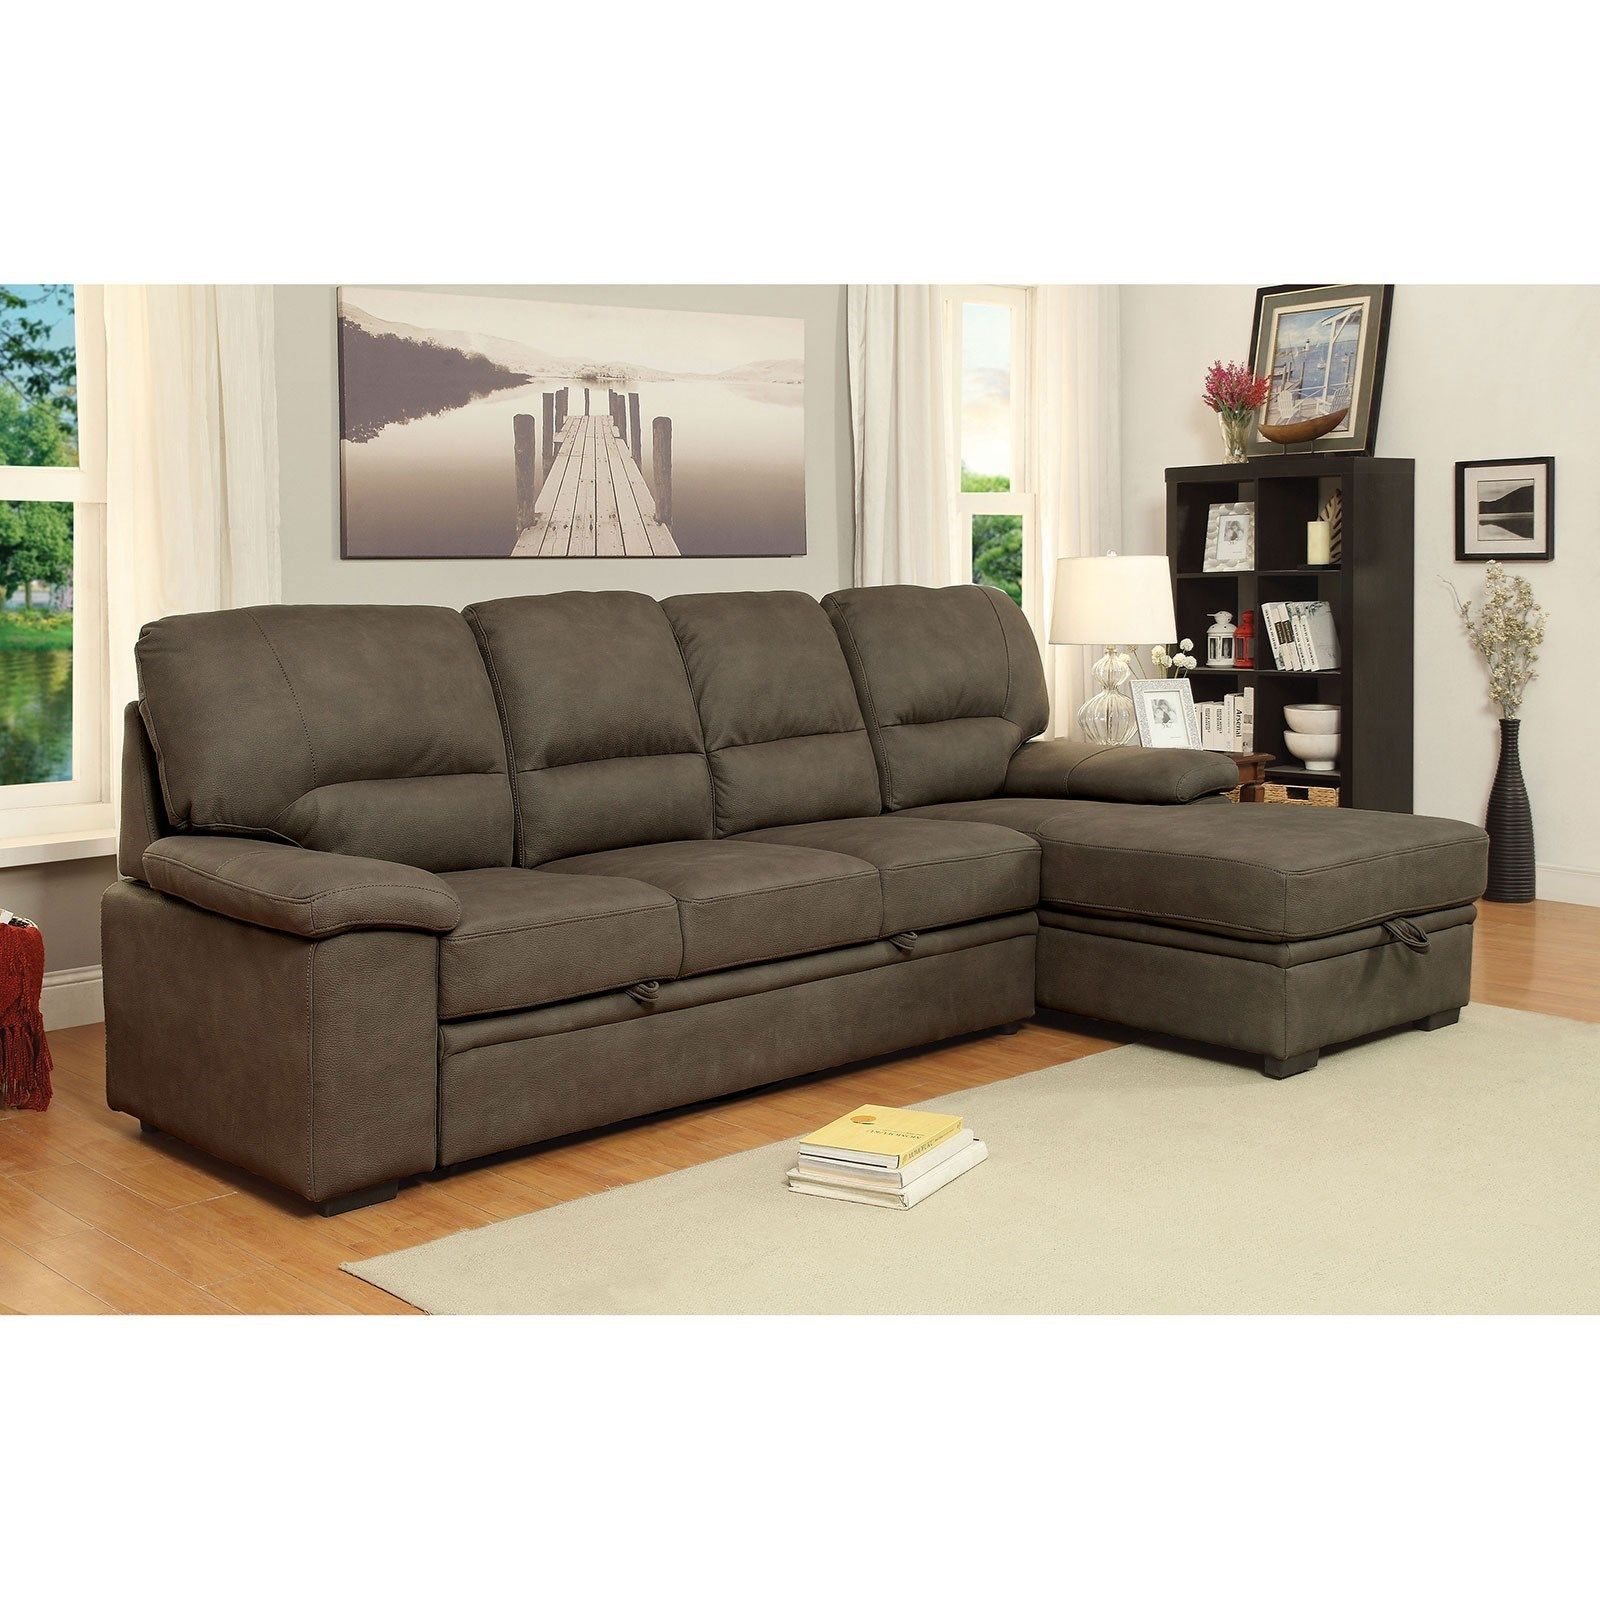 Furniture Of America Alcester 4 Seat Sectional Sofa With Sleeper And With Left Or Right Facing Sleeper Sectionals (View 17 of 21)